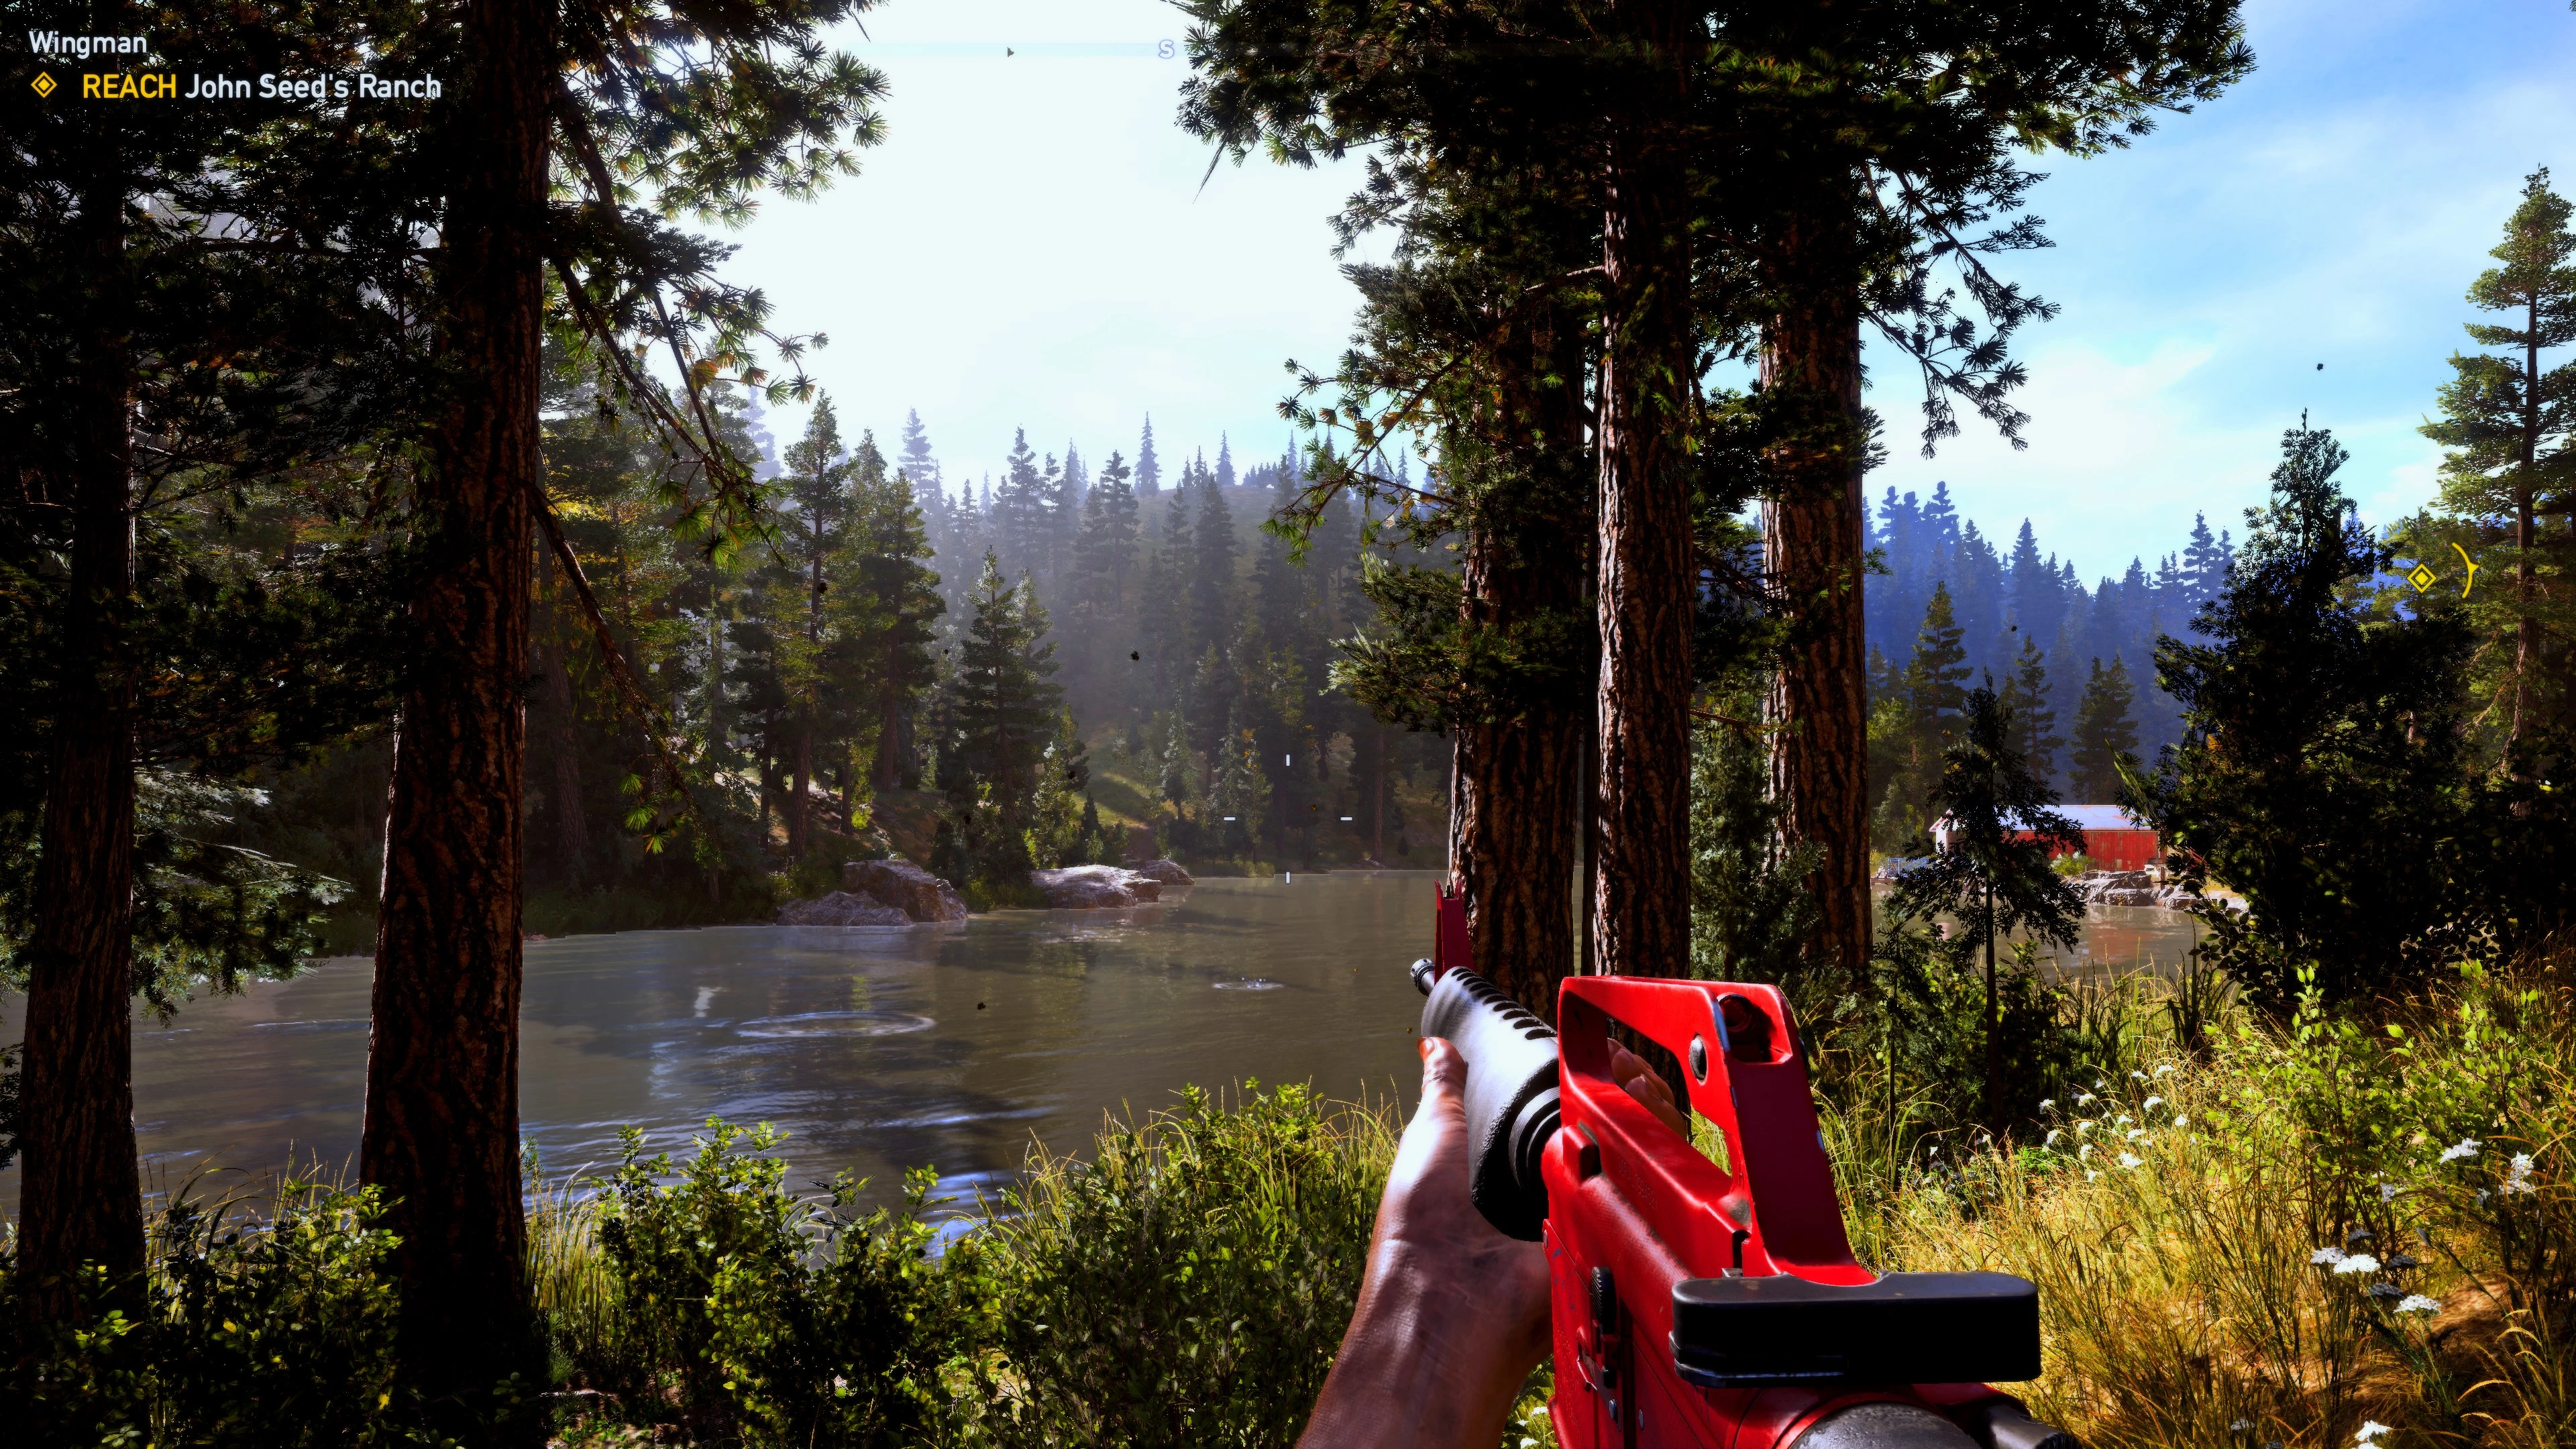 will there be far cry 5 mods